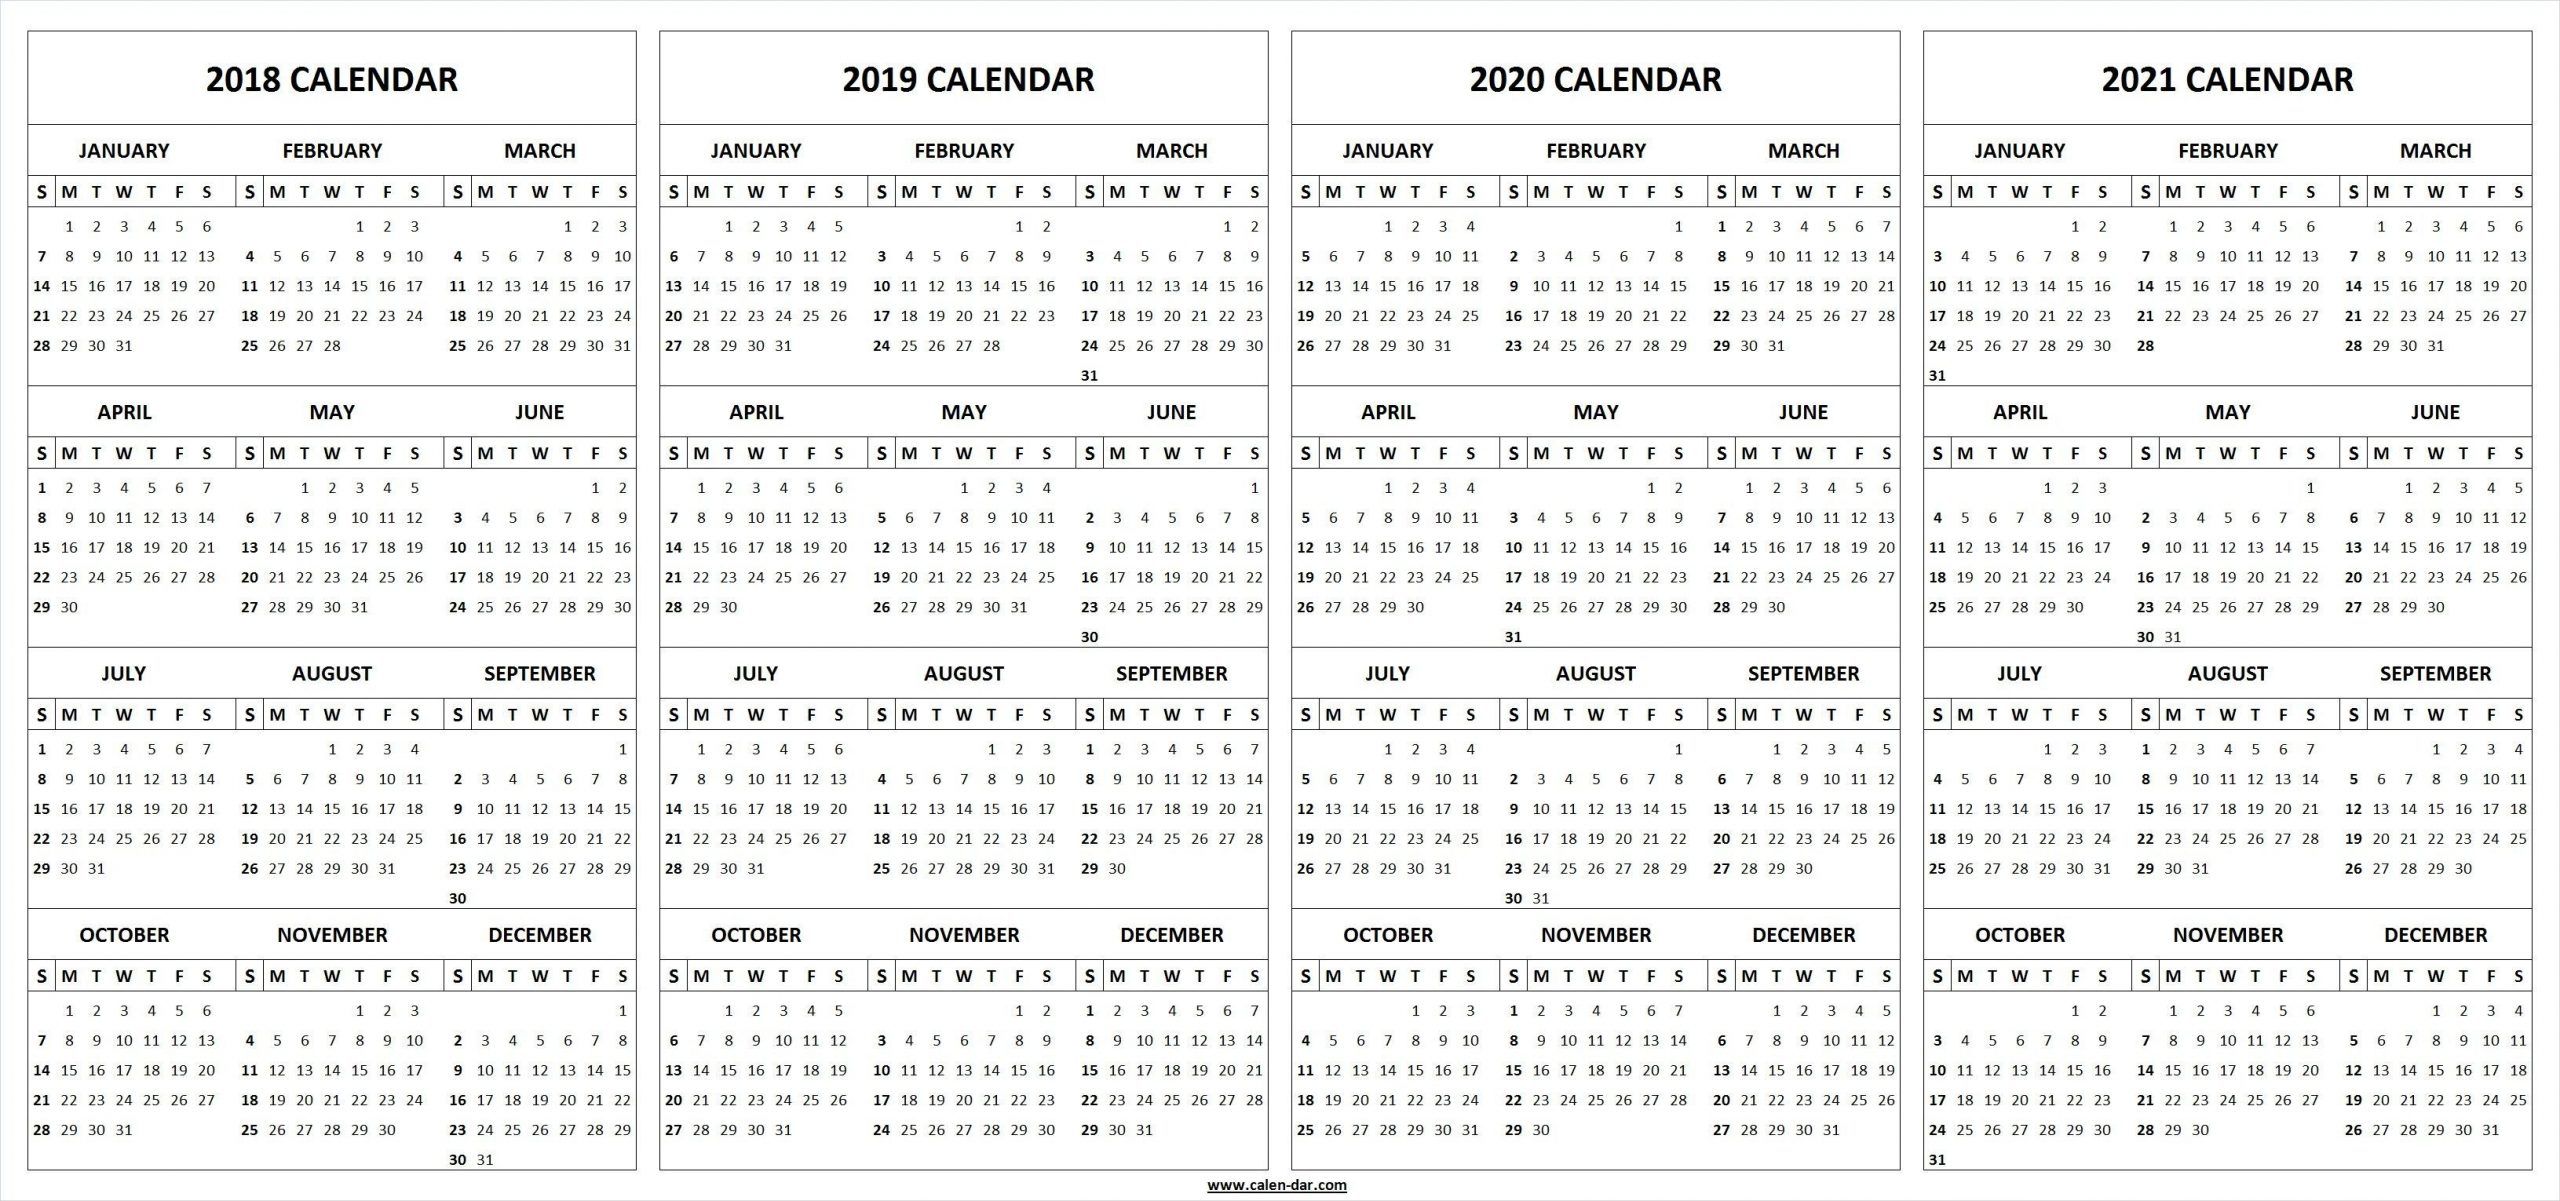 Printable 2018 2019 2020 2021 Calendar Template (With Images